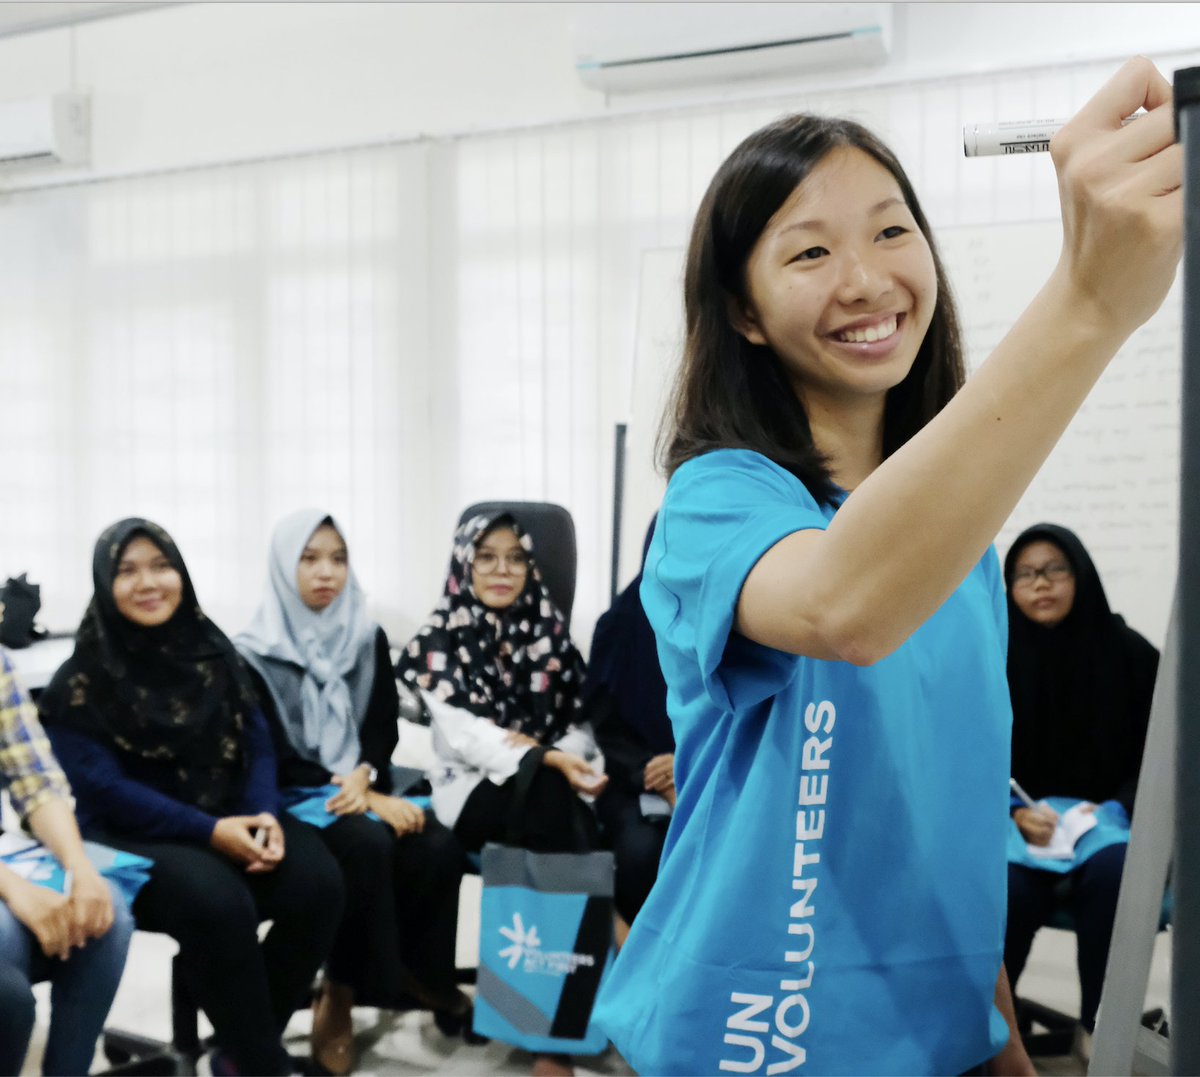 UNV mobilizes a much-needed resource of qualified UN #Volunteers - from the seasoned and committed to the optimistic and young - who are ready to make their energy and skills available in the pursuit of sustainable #development and lasting #peace🙌